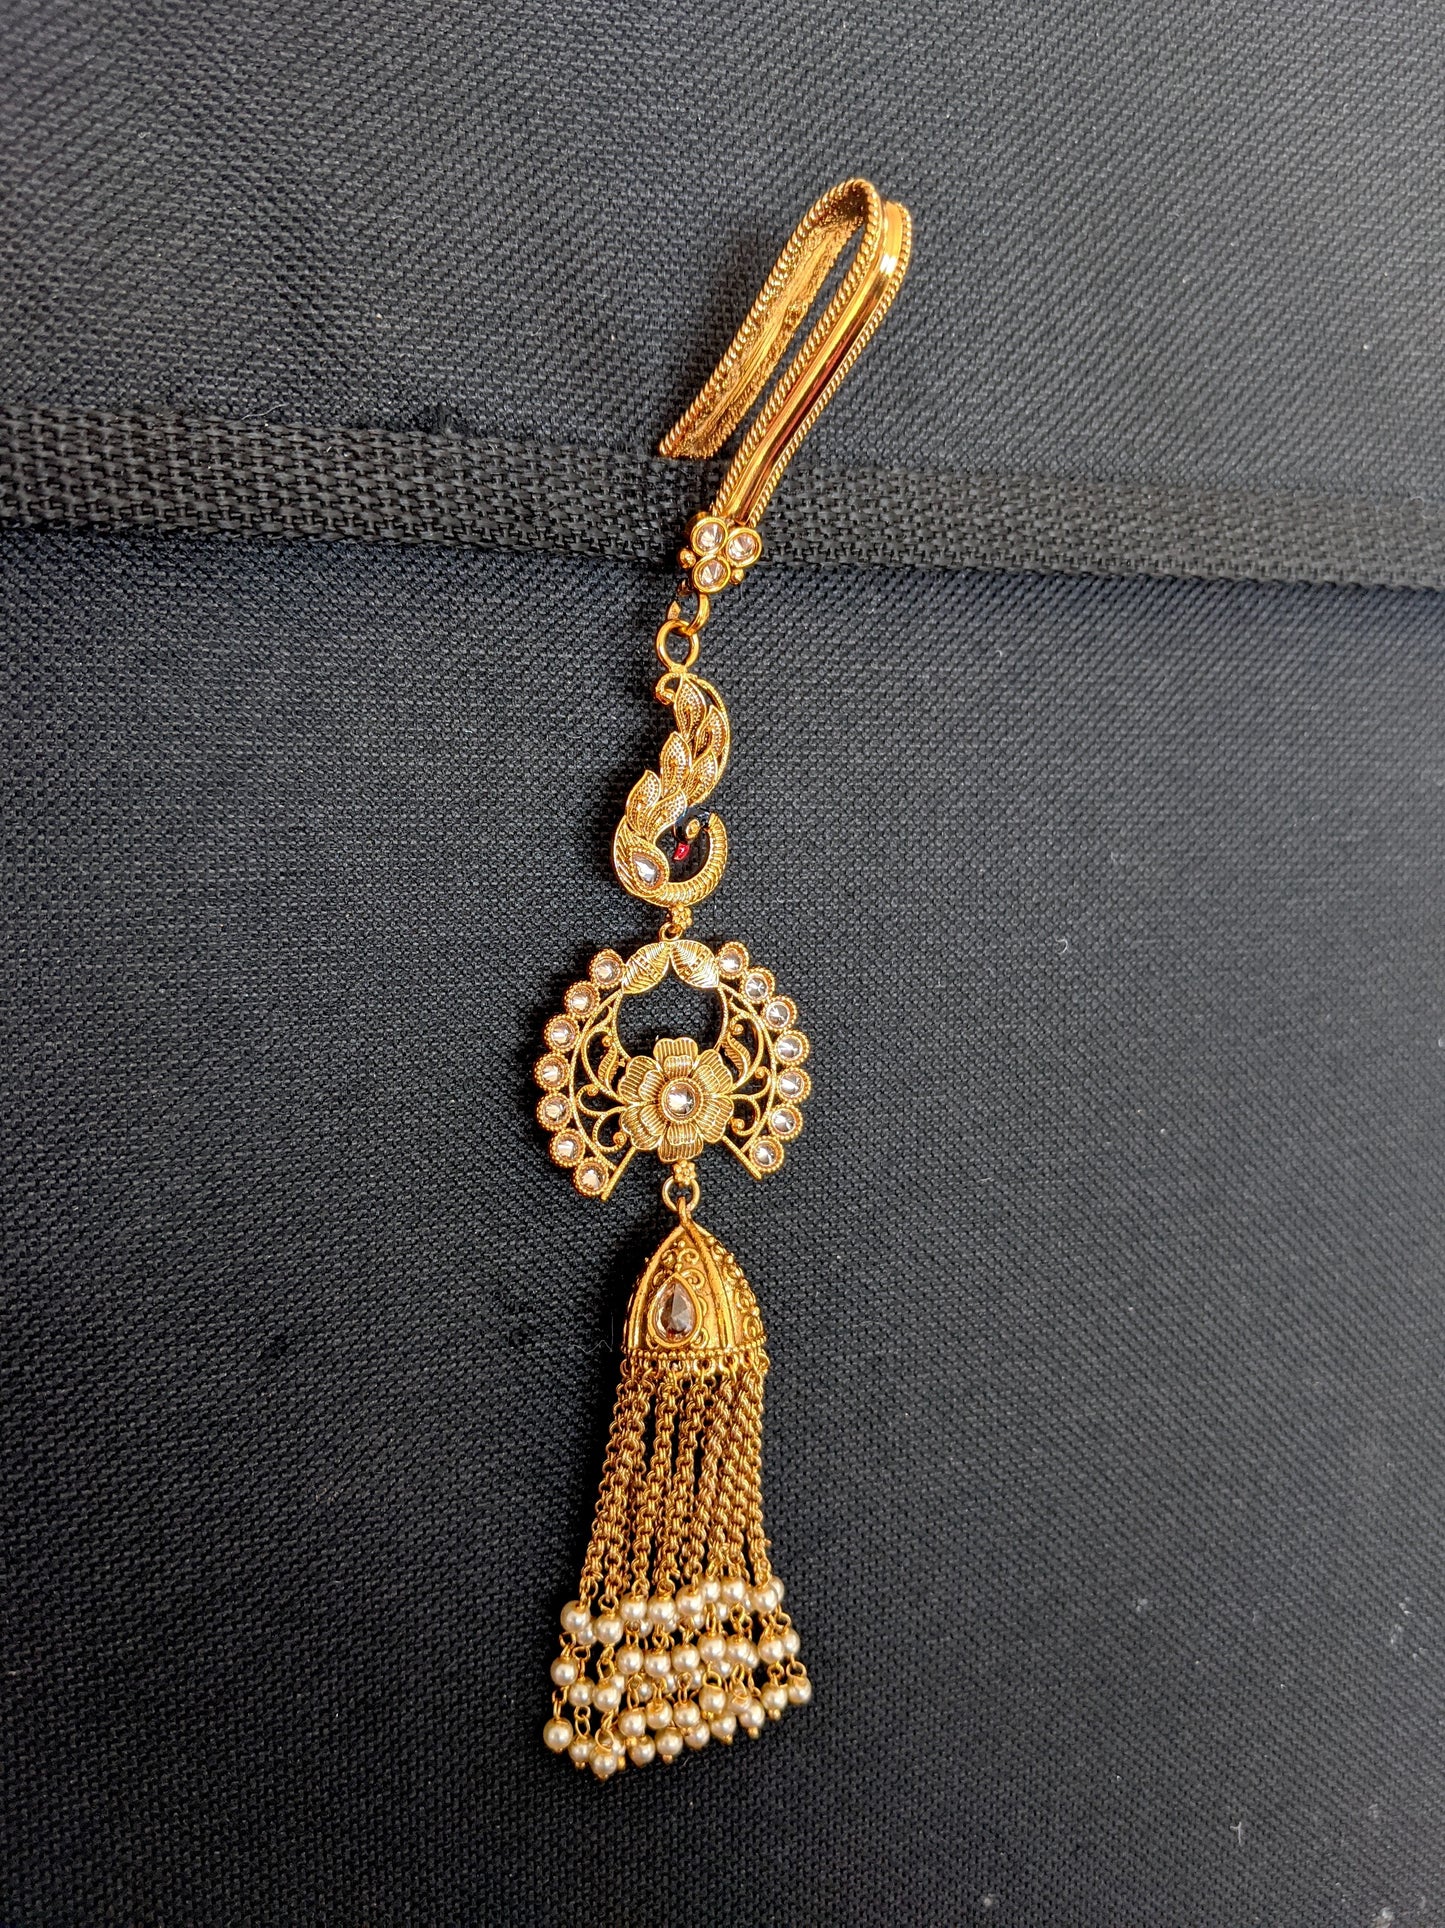 Peacock Traditional Hip Clip / Juda / Antique Gold Jewelry / Jhumka dangle Hip Accessory